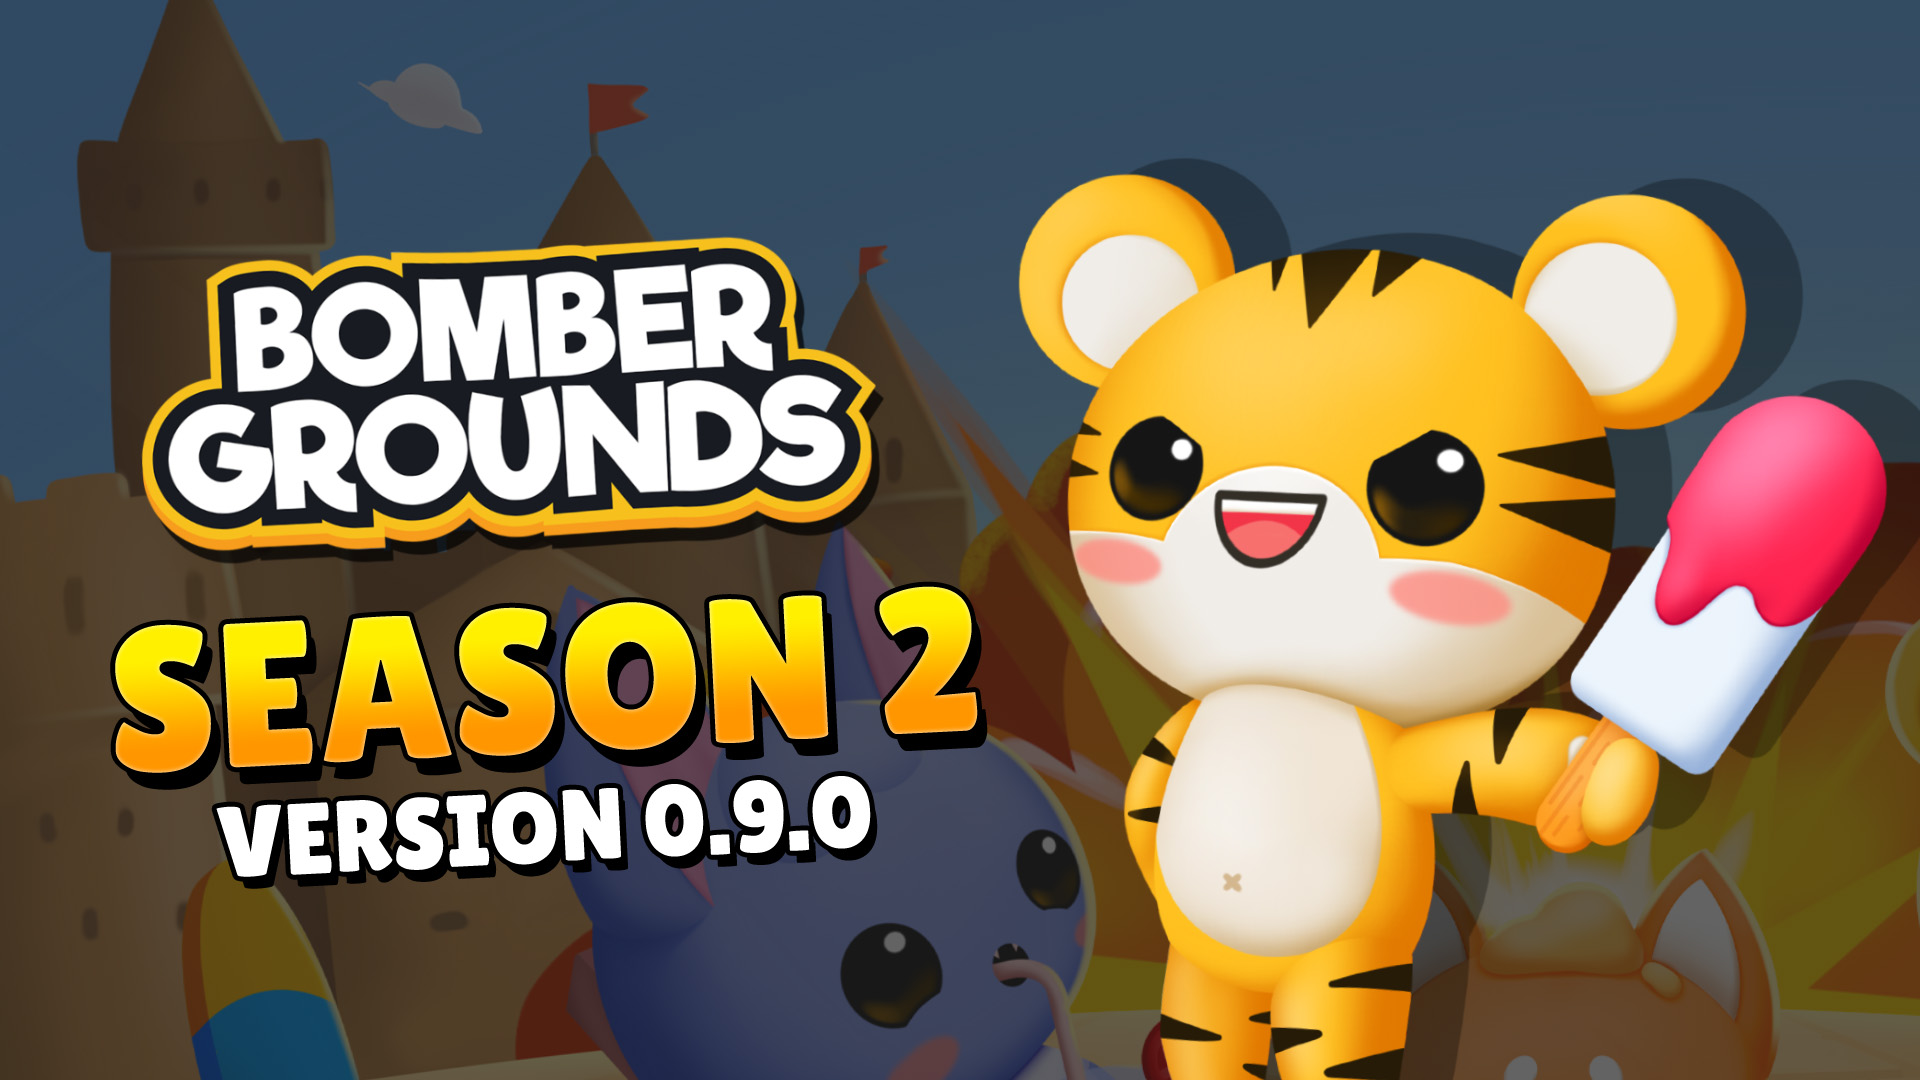 About: Bombergrounds: Reborn (Google Play version)